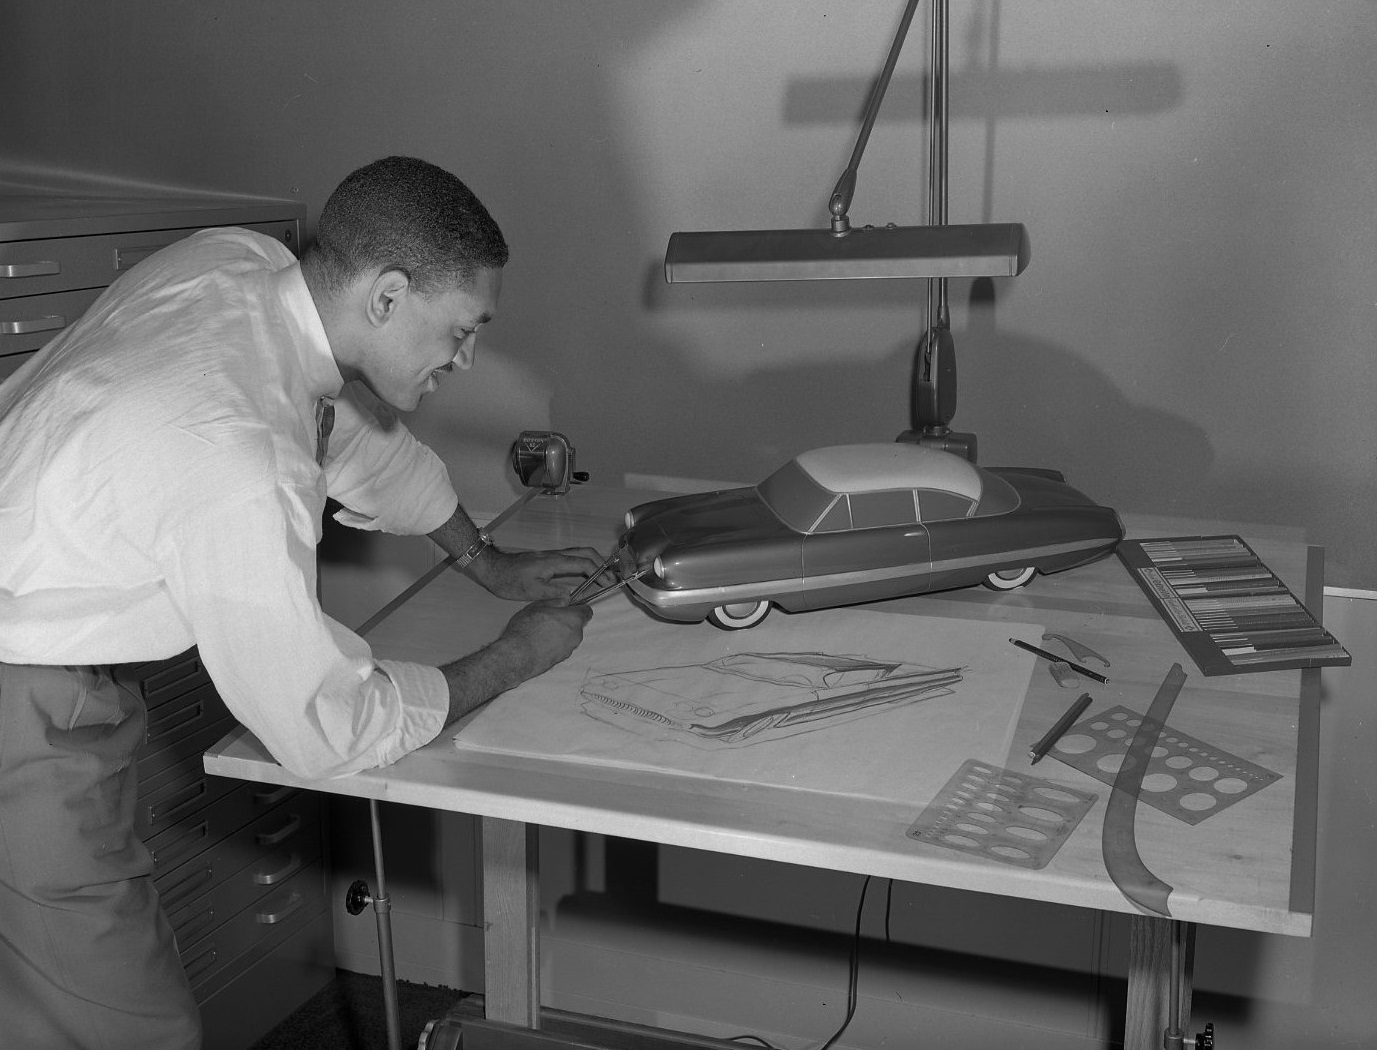 McKinley Thompson Jr. was the first African American designer hired at Ford Motor Co. 